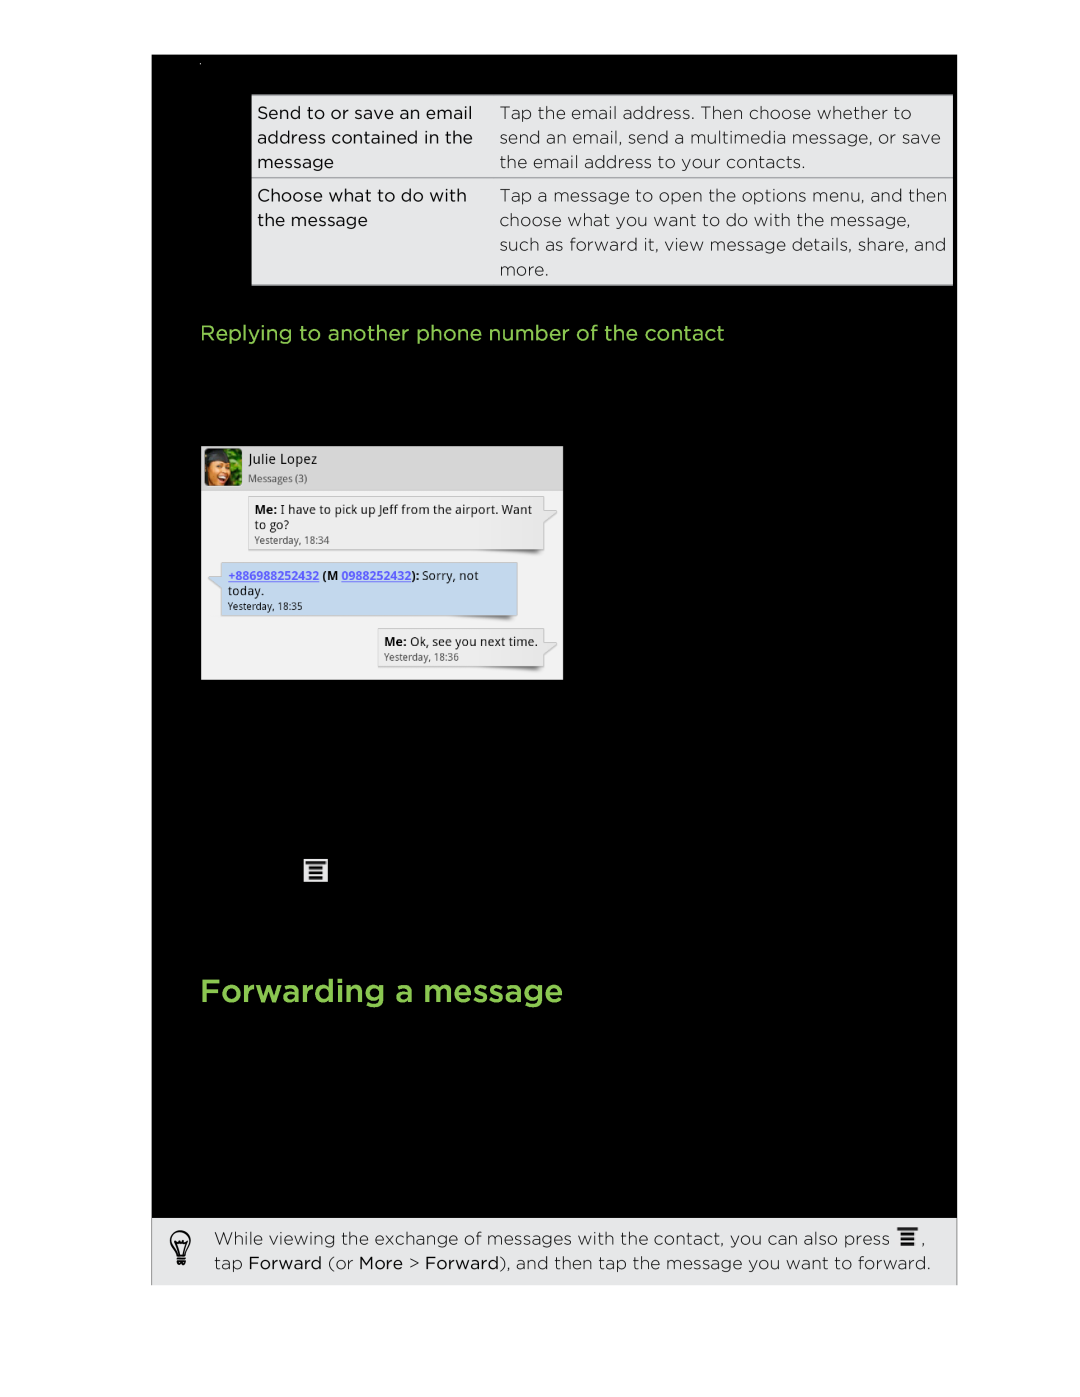 HTC HTCFlyerP512 manual Forwarding a message, Replying to another phone number of the contact 